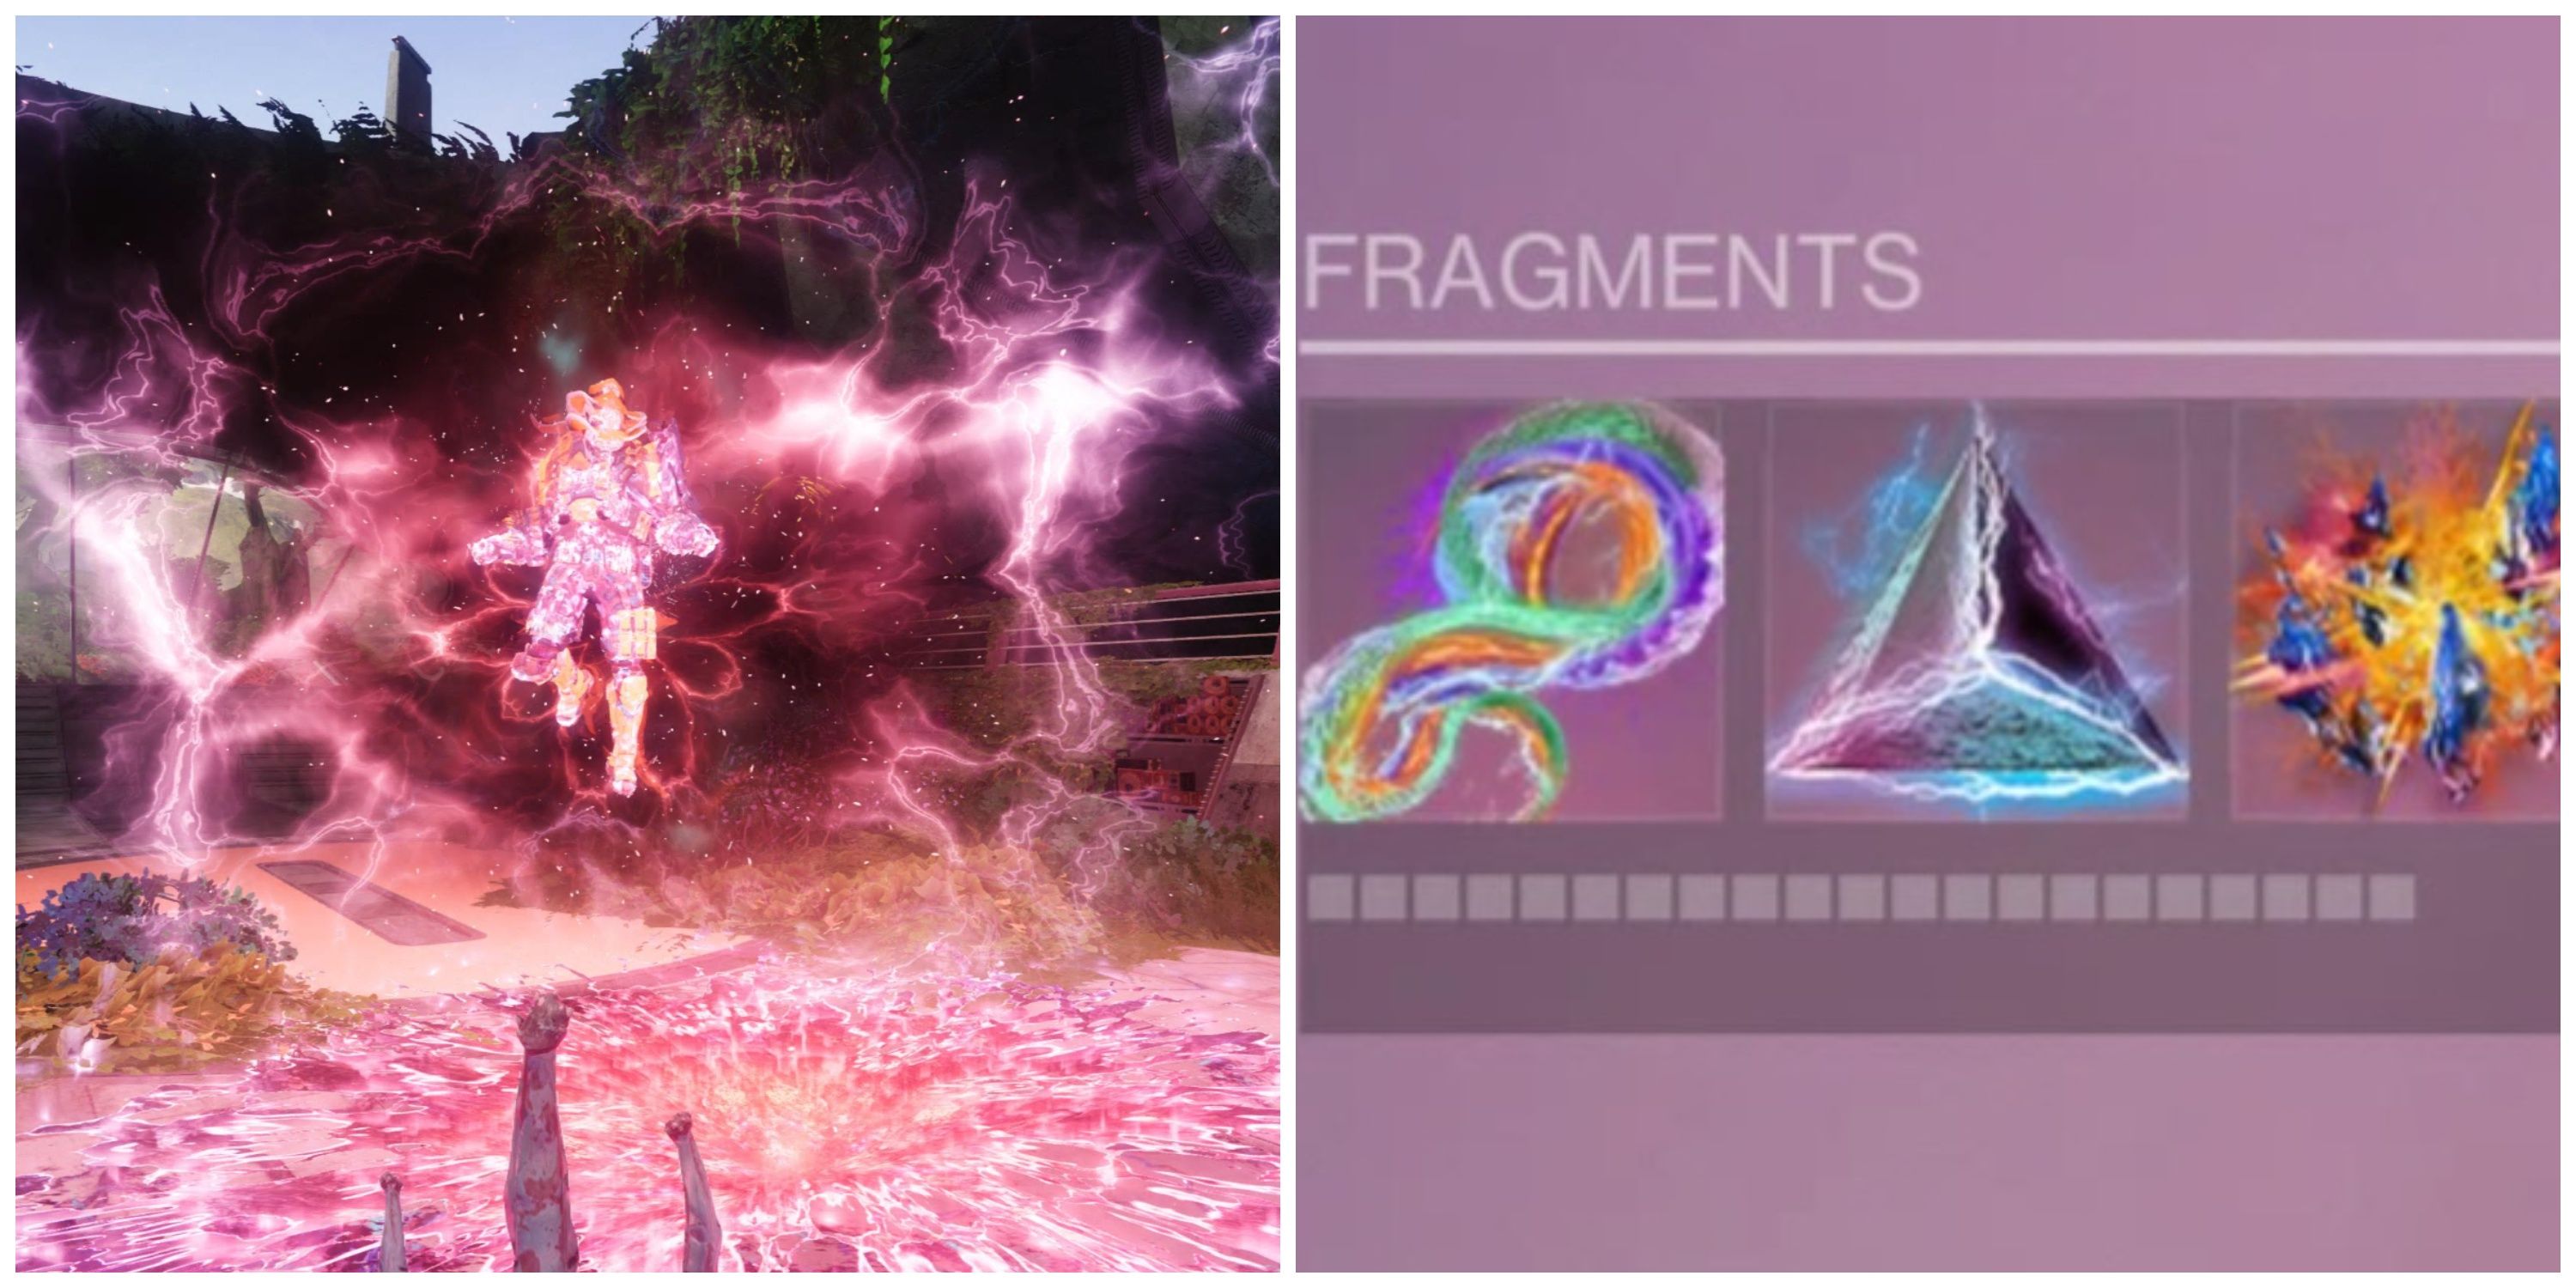 guardian getting prismatic and prismatic fragments